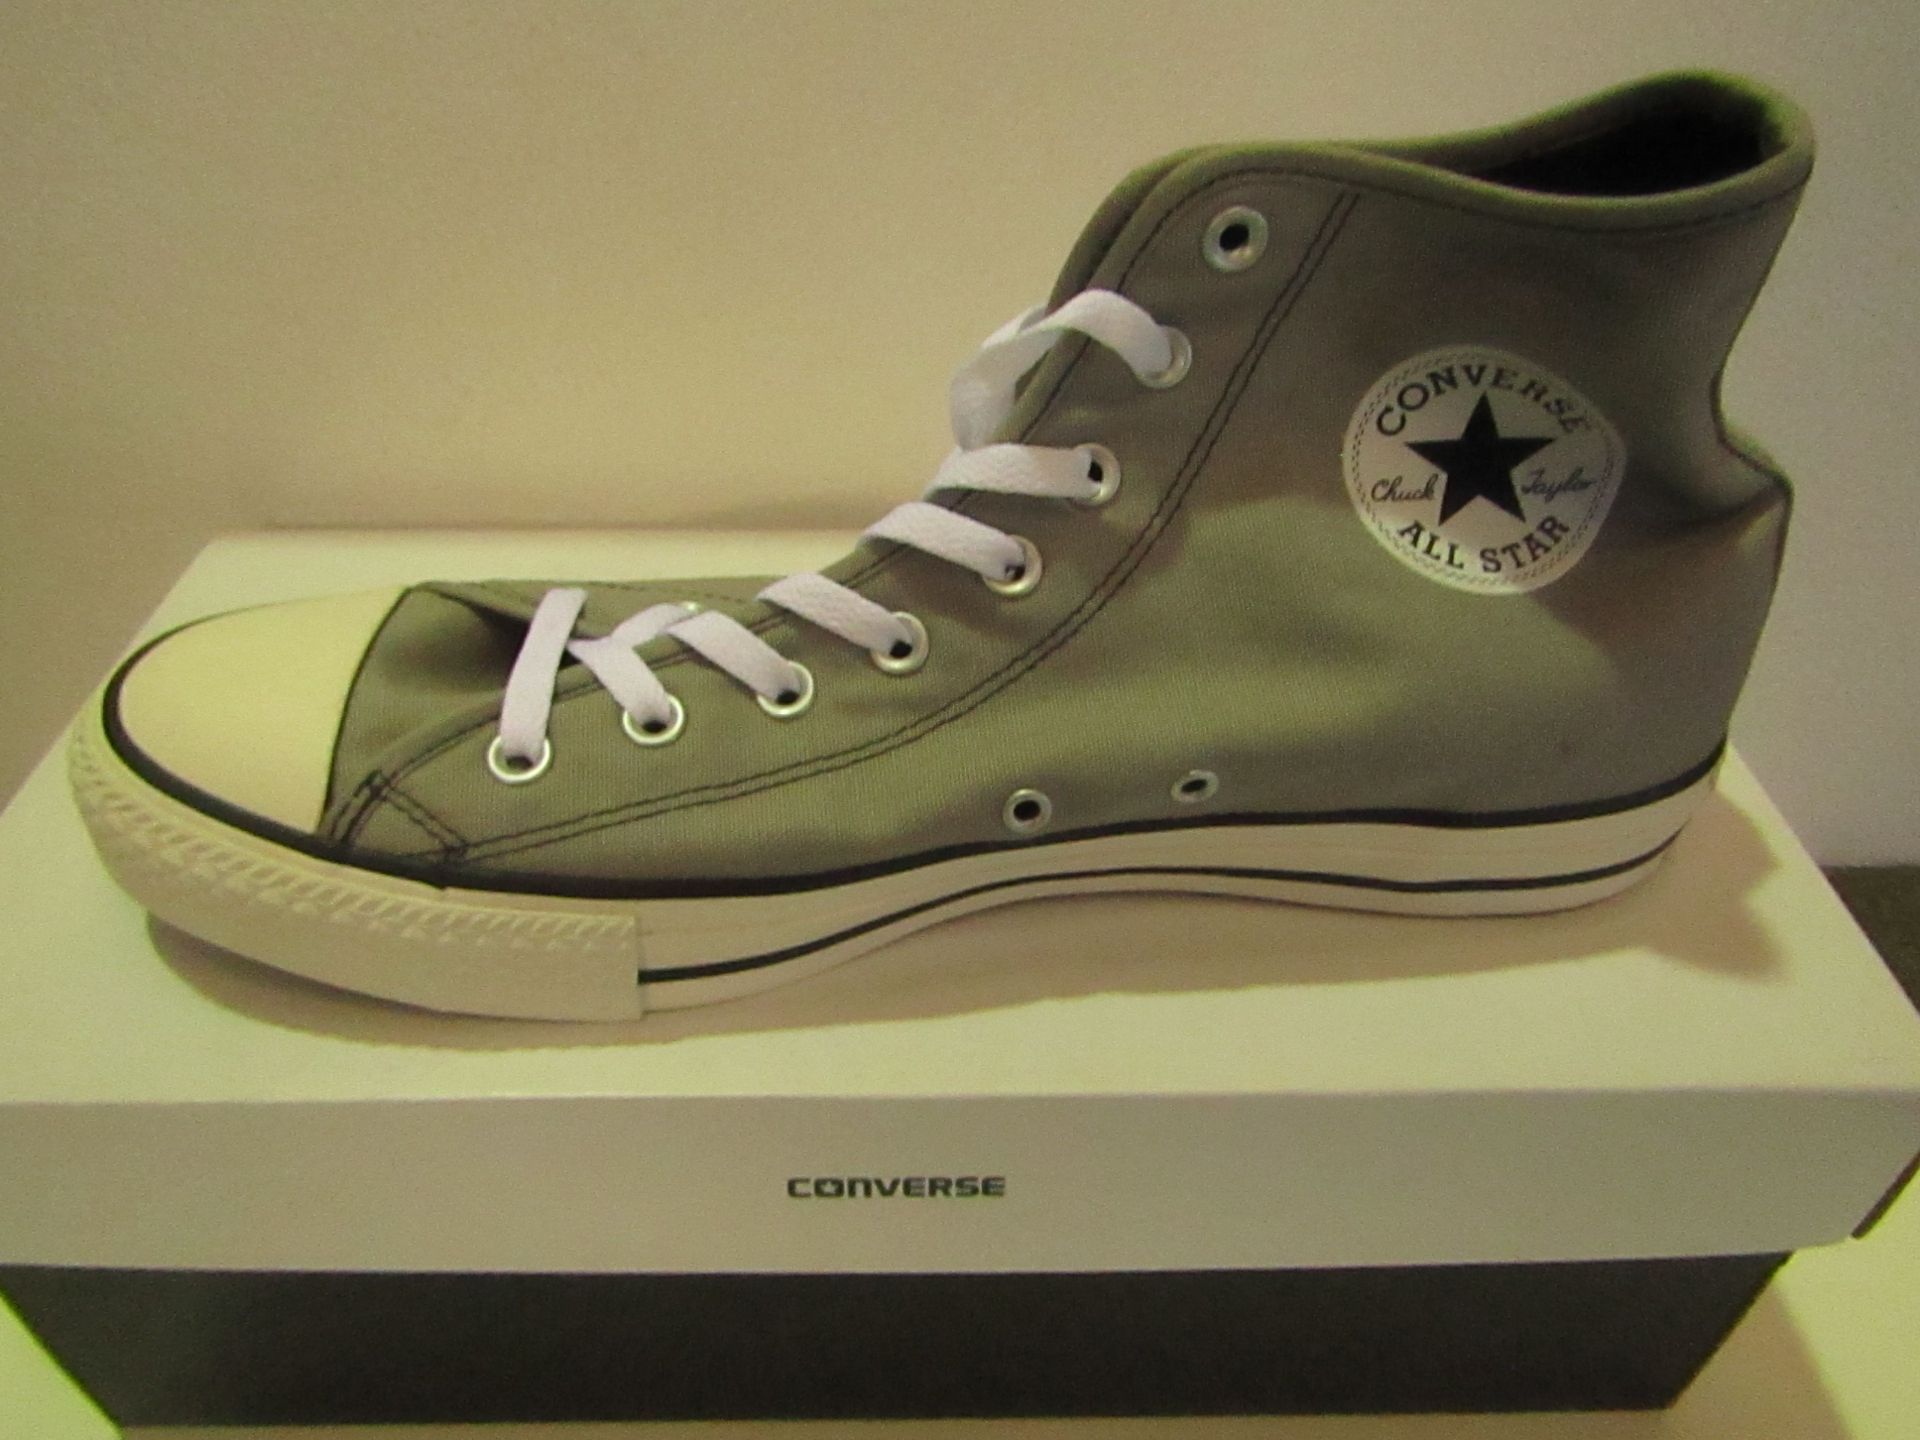 Converse High Top Grey/White Canvas Trainer size UK12 new & boxed see image for design